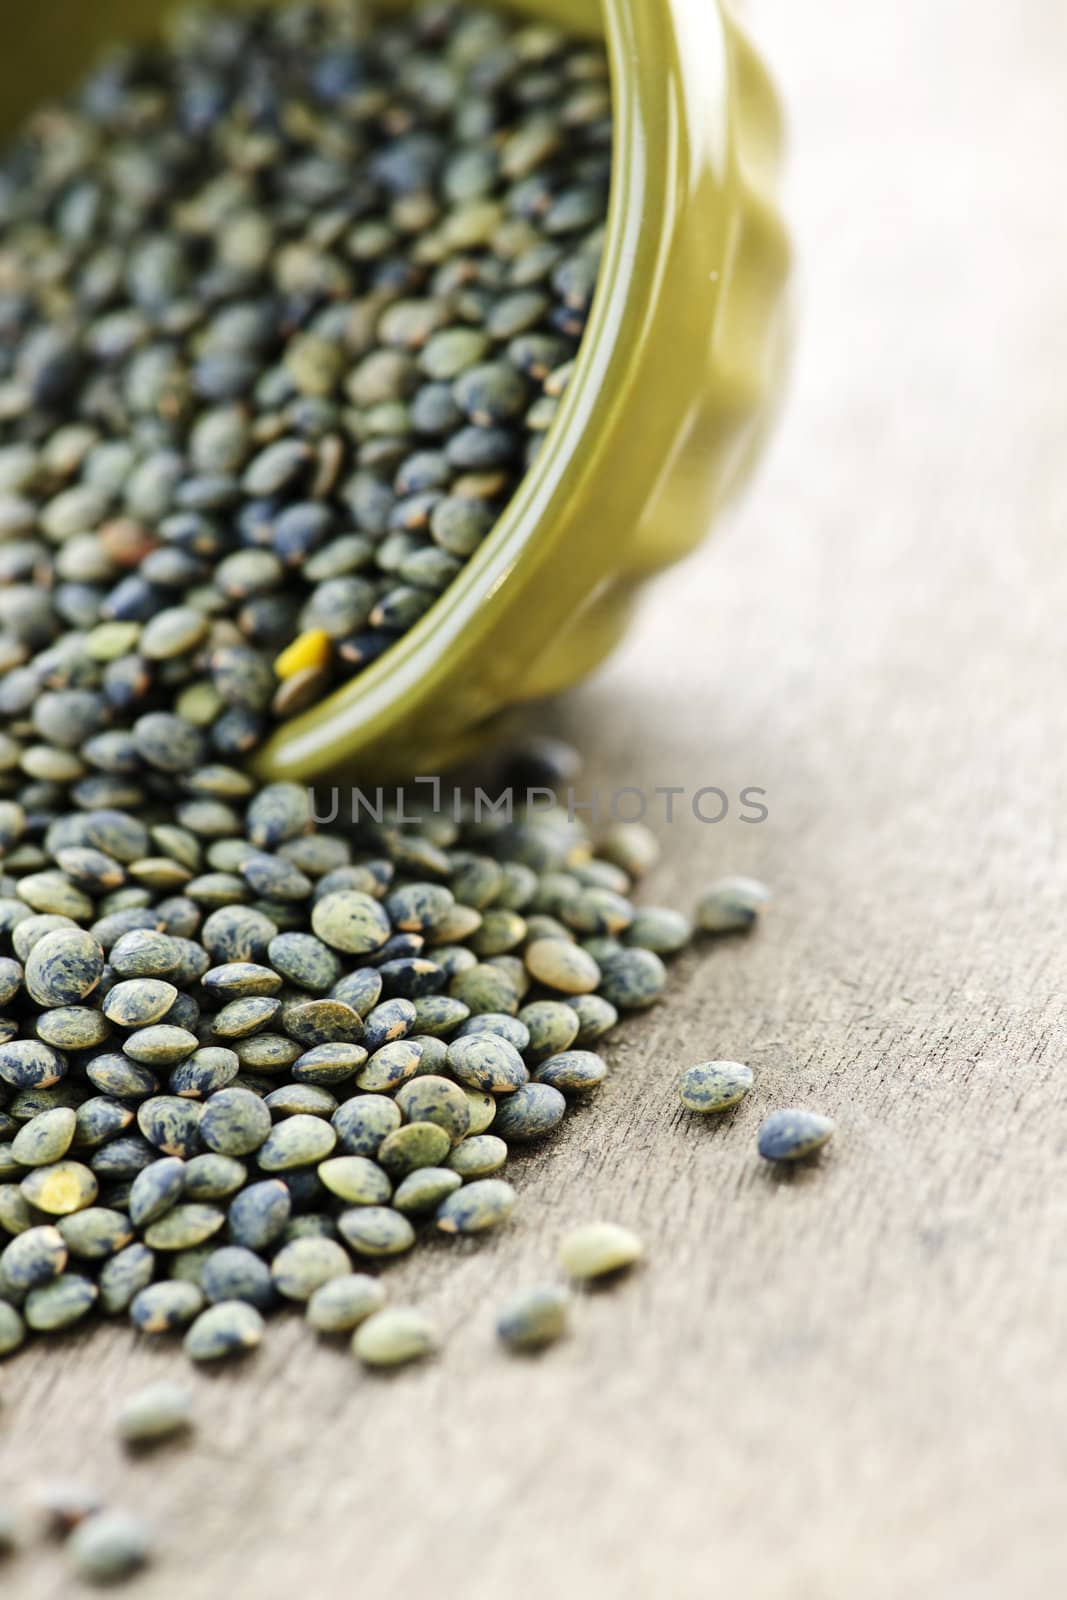 Bowl of uncooked French lentils by elenathewise